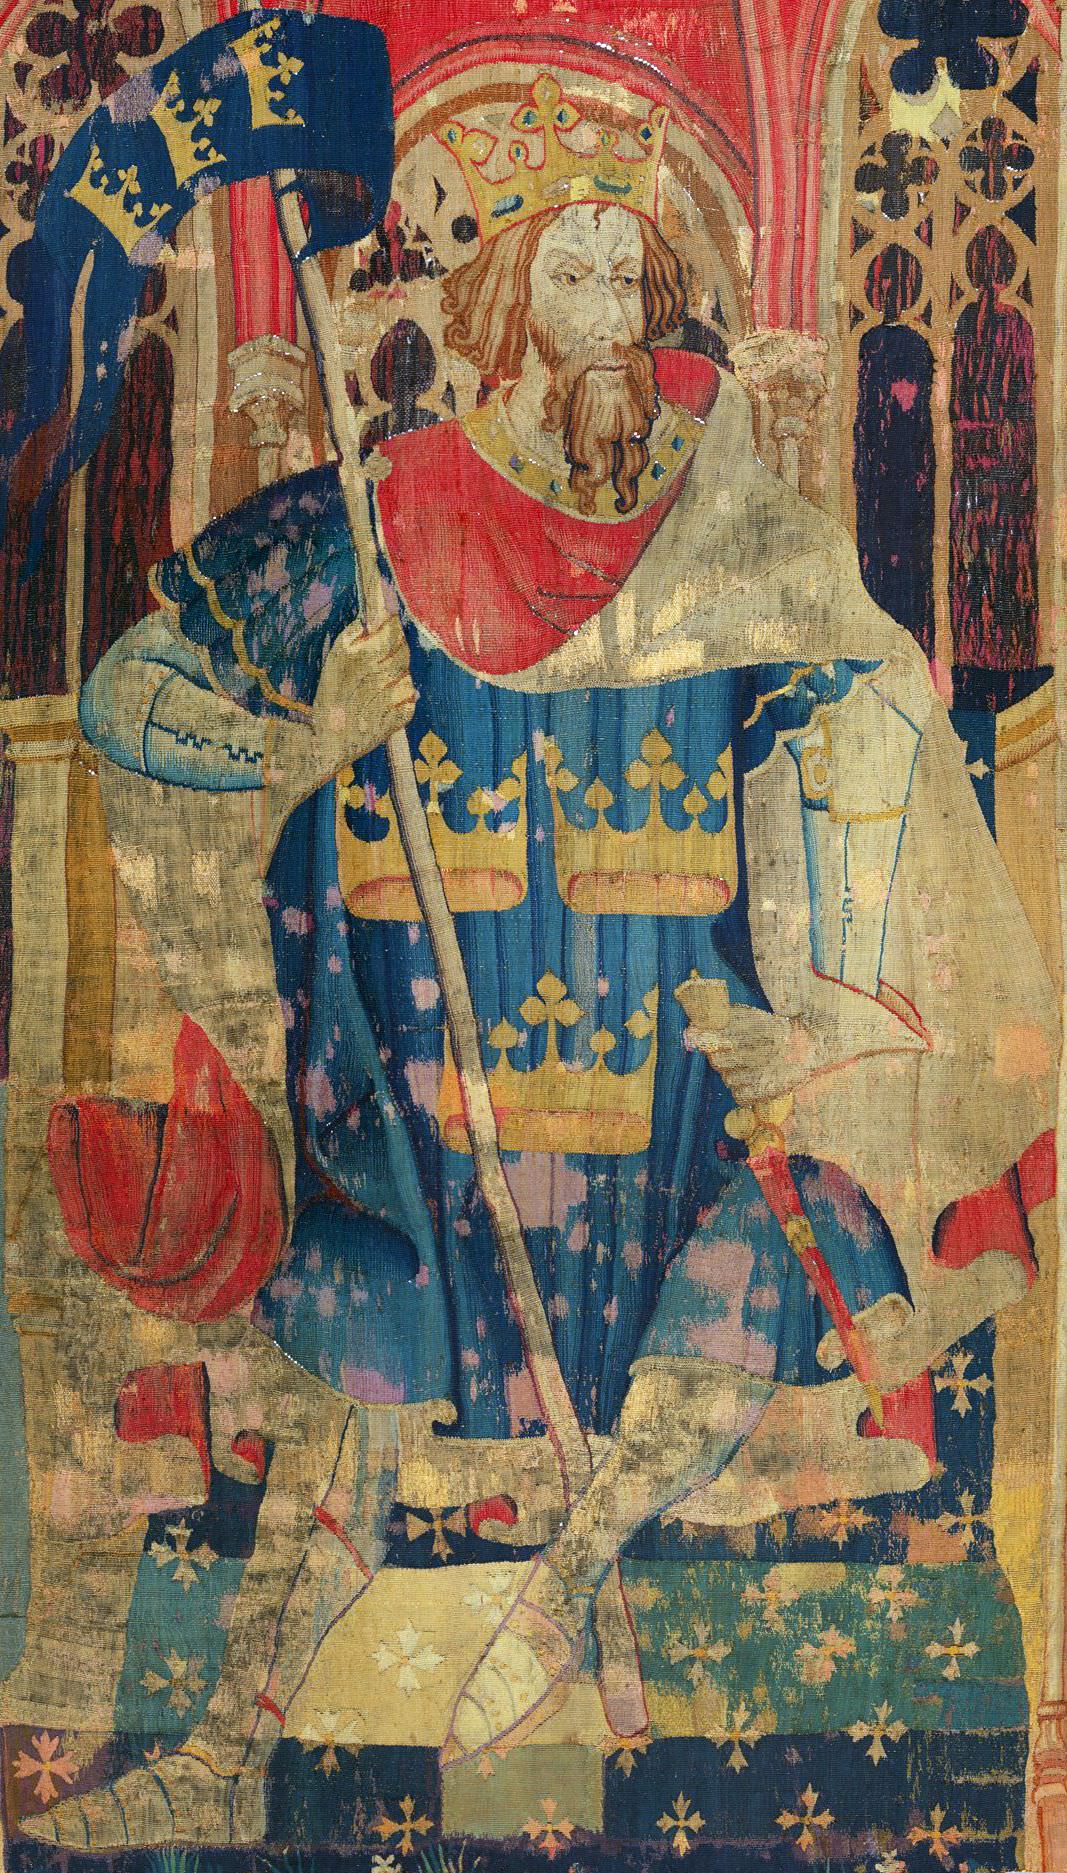 King Arthur in "Idylls of The King"